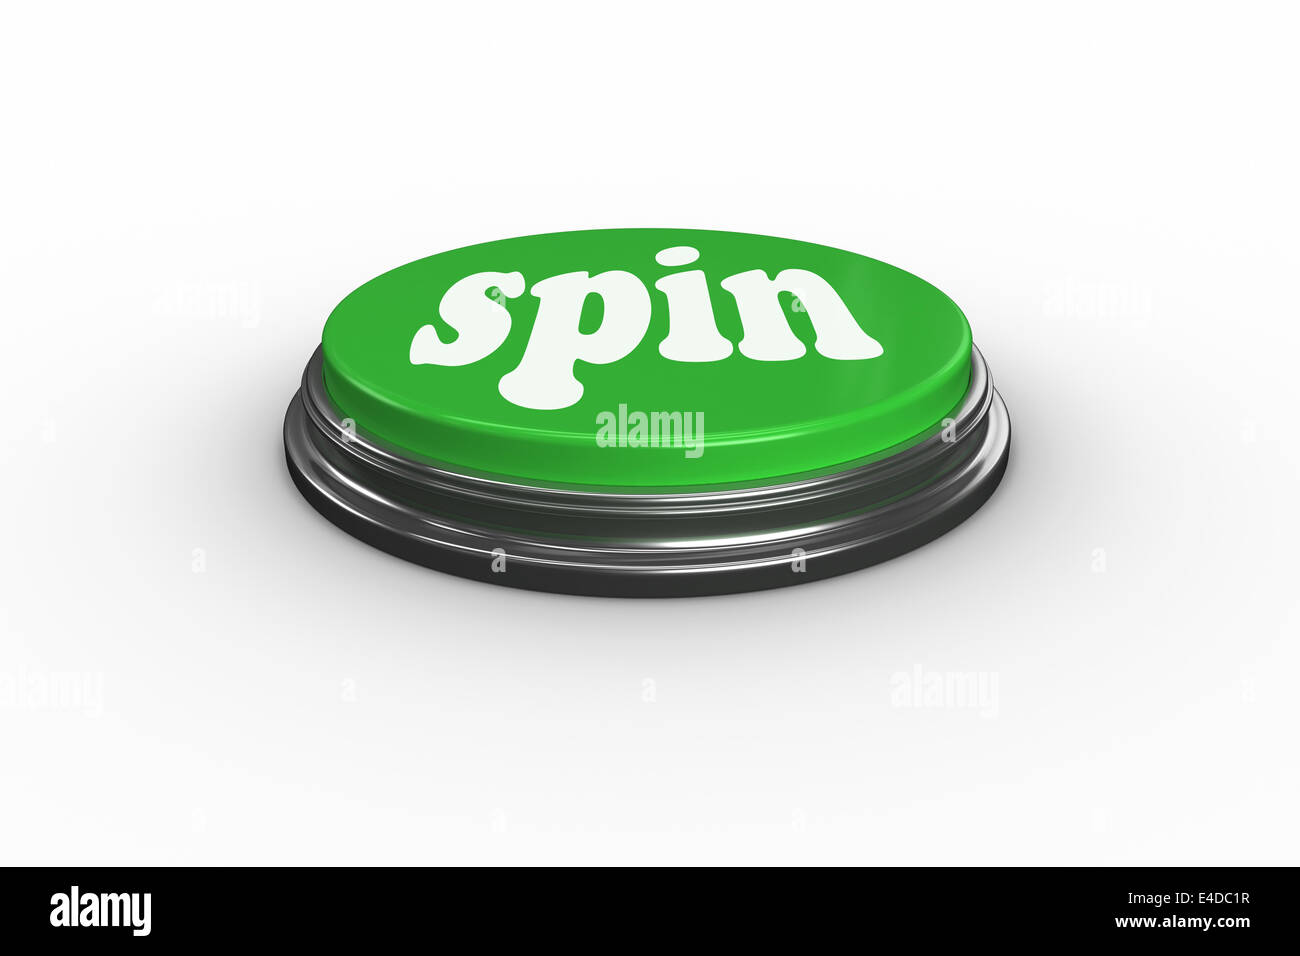 Spin on digitally generated green push button Stock Photo